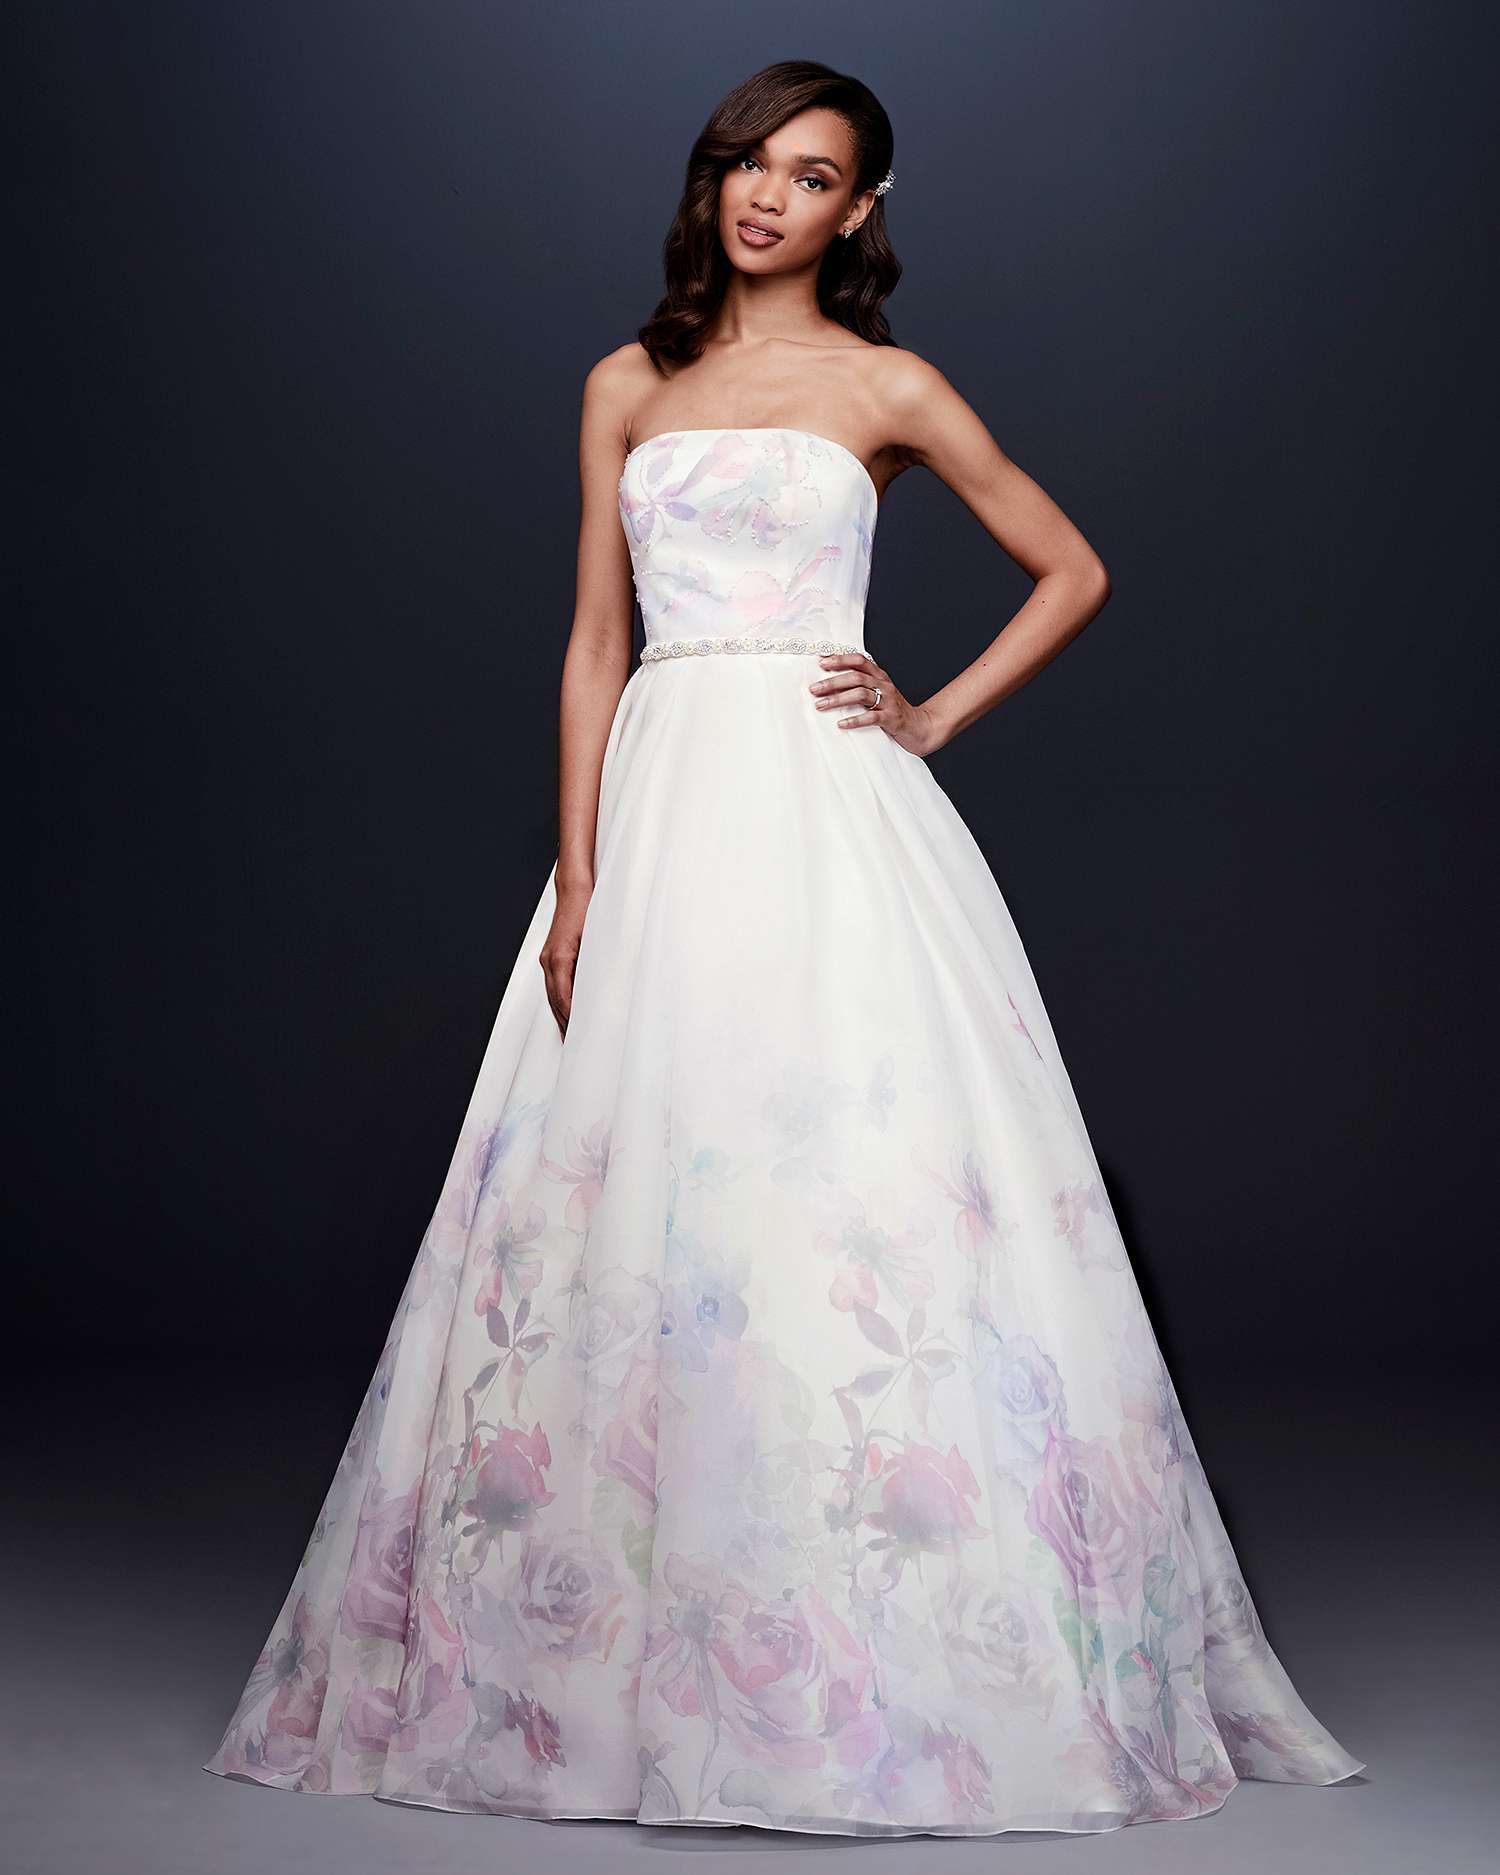 davids bridal wedding dress fall 2019 strapless a-line with pastel flowers